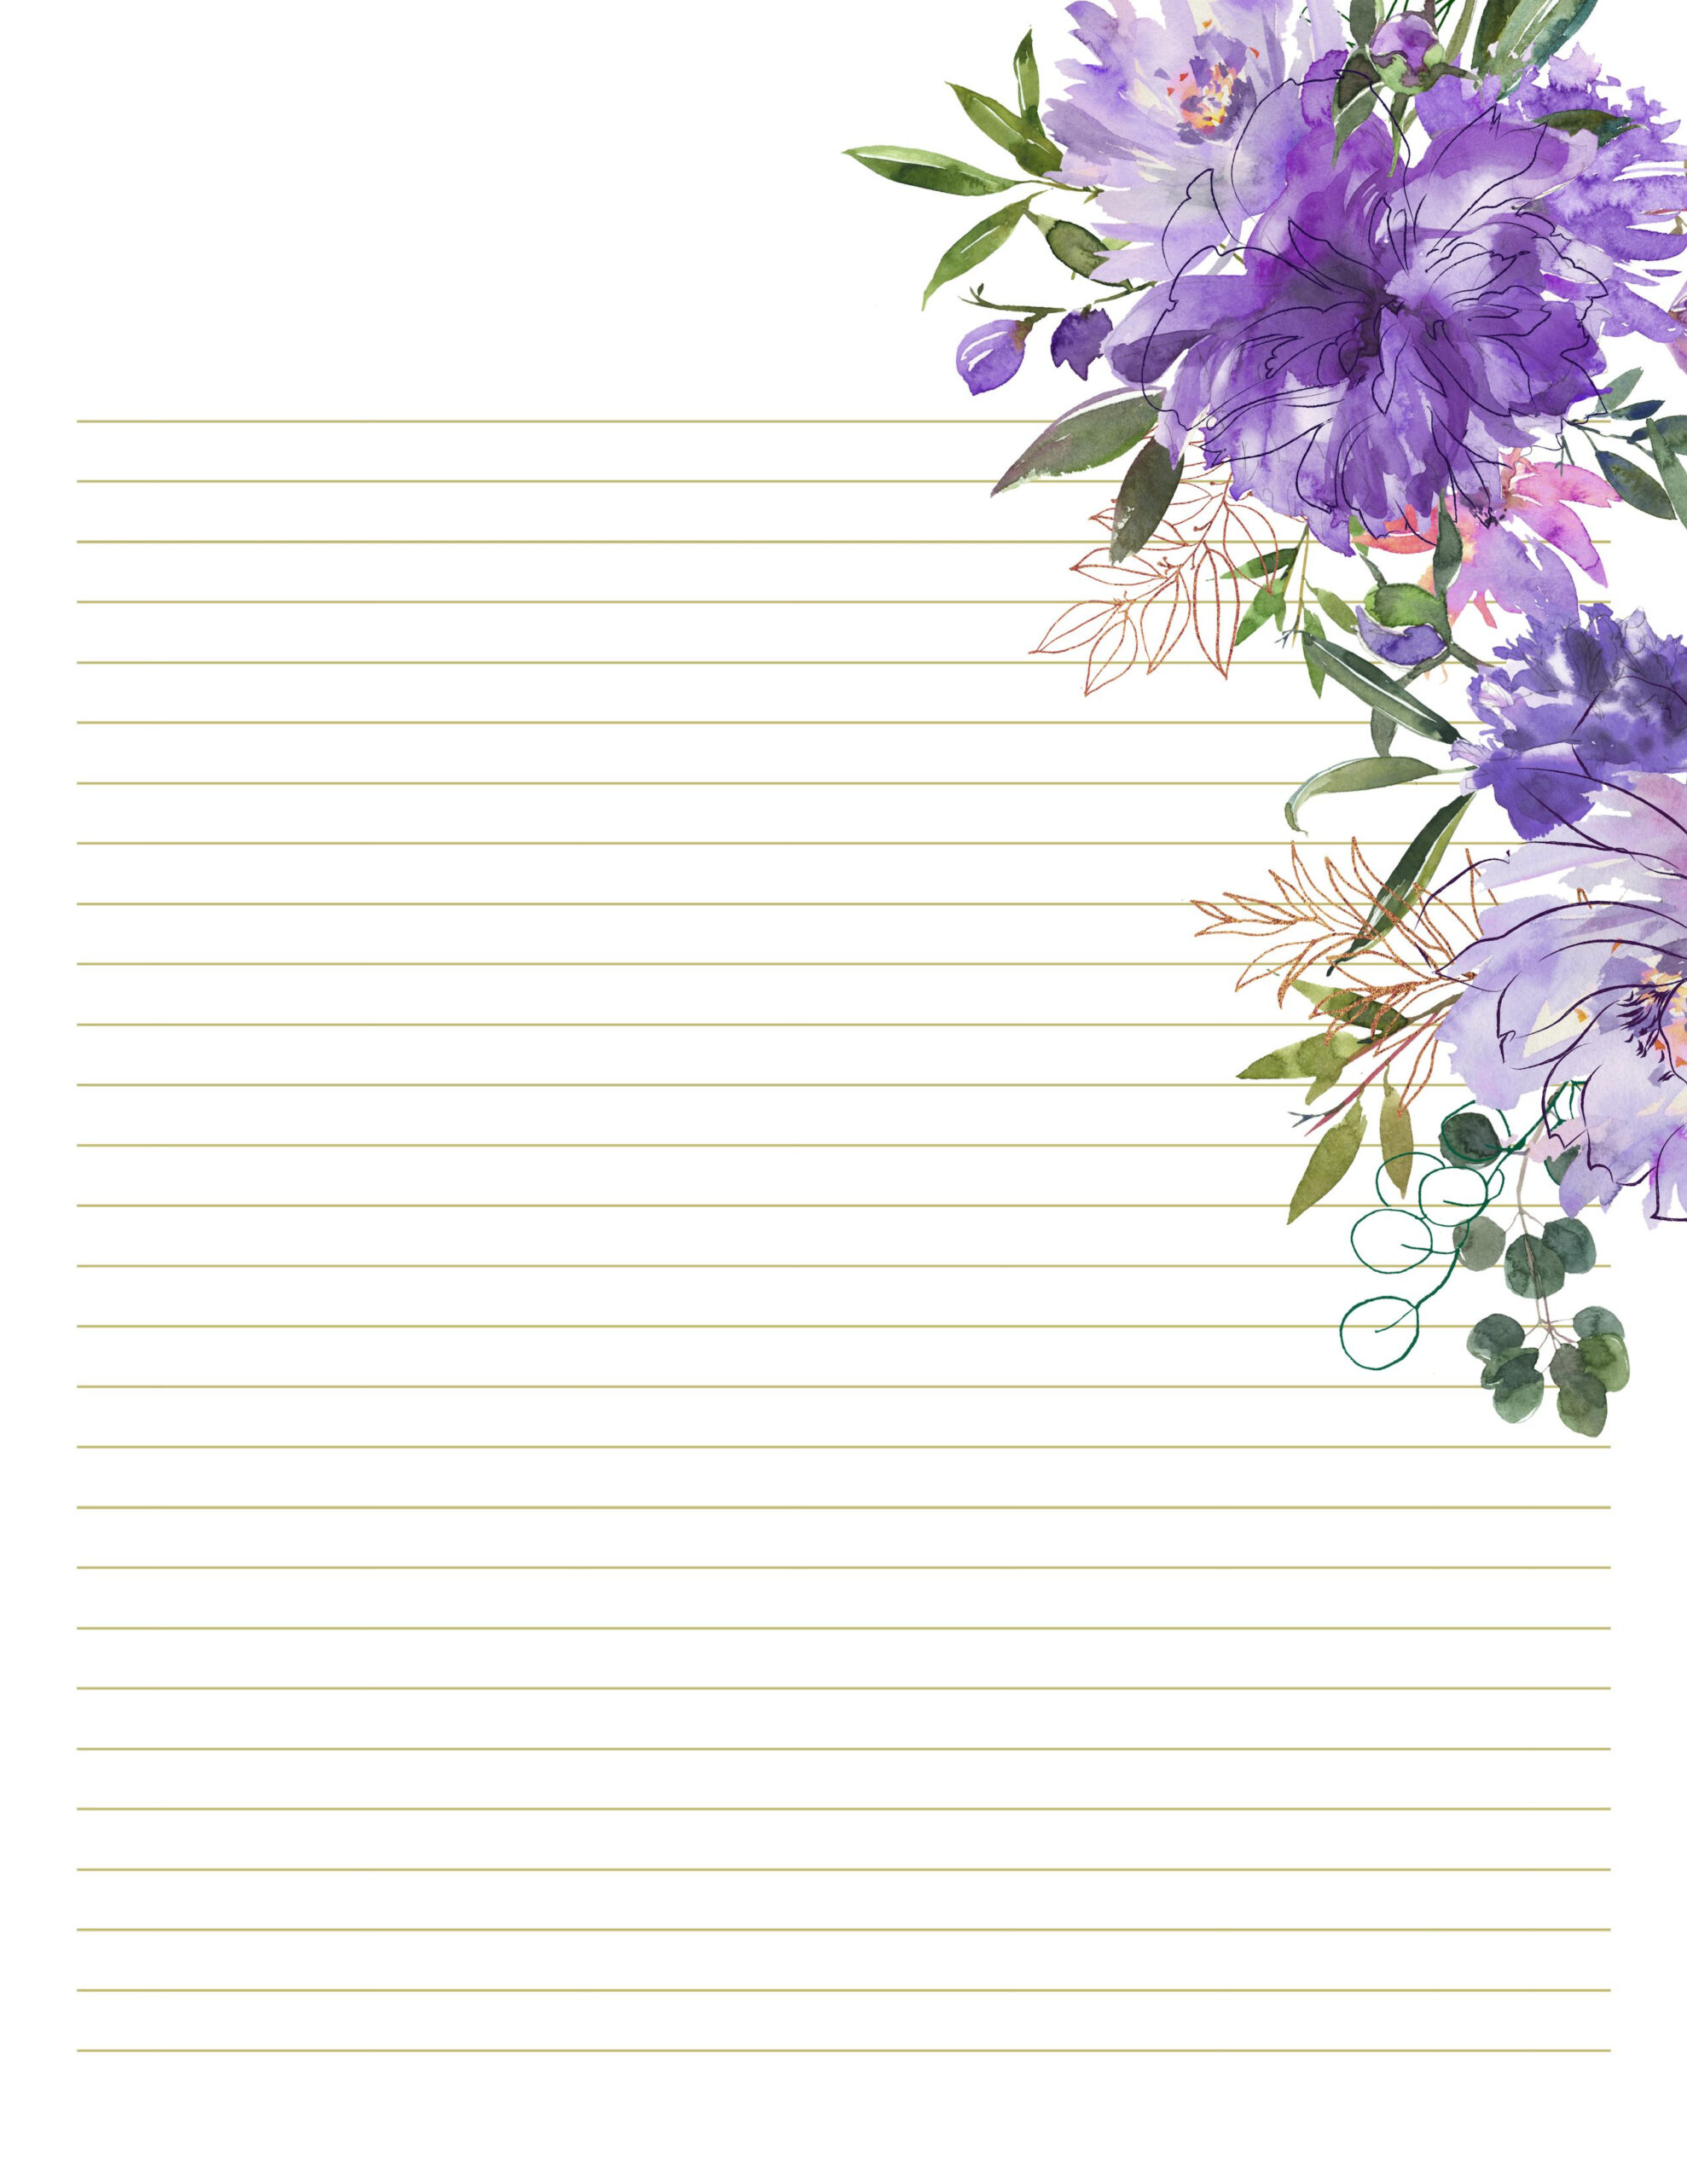 Free Printable Lined Writing Paper Flowers